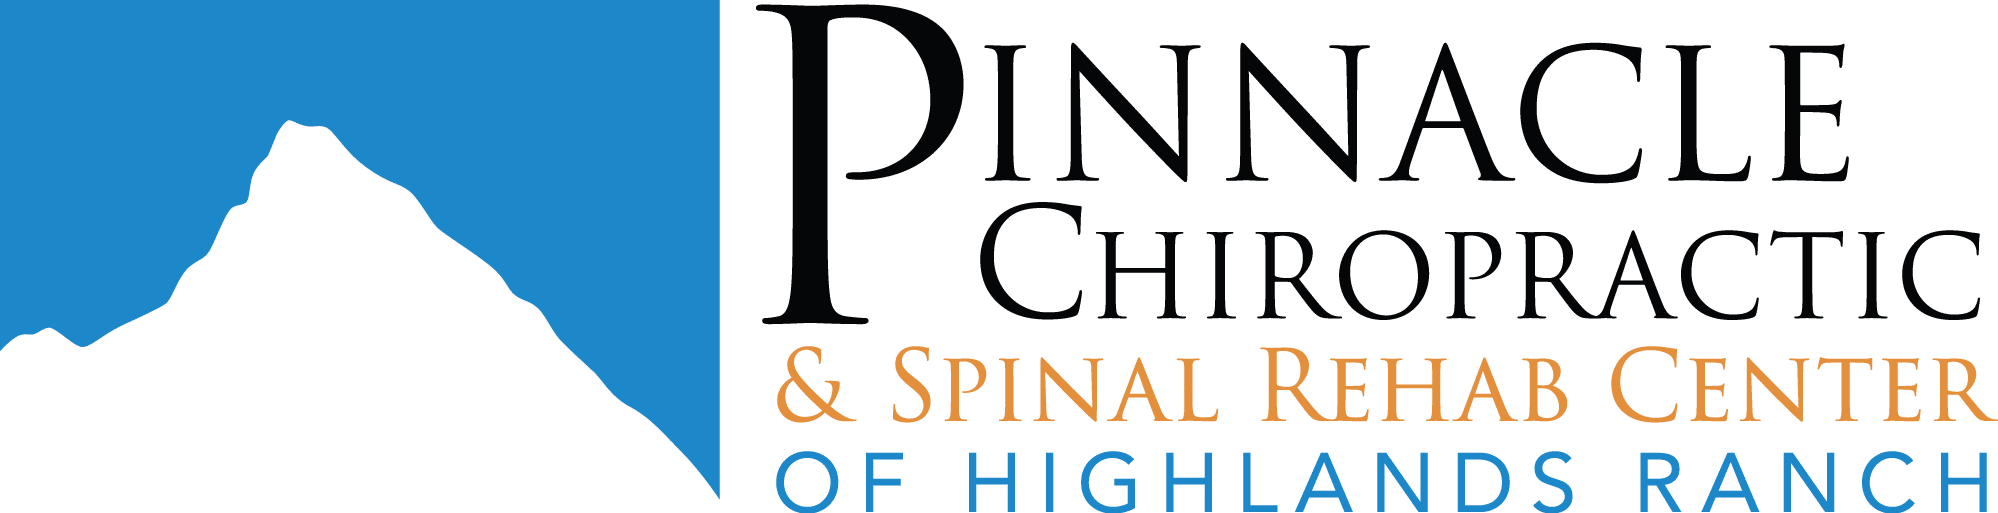 Pinnacle Chiropractic and Spinal Rehab Center of Highlands Ranch